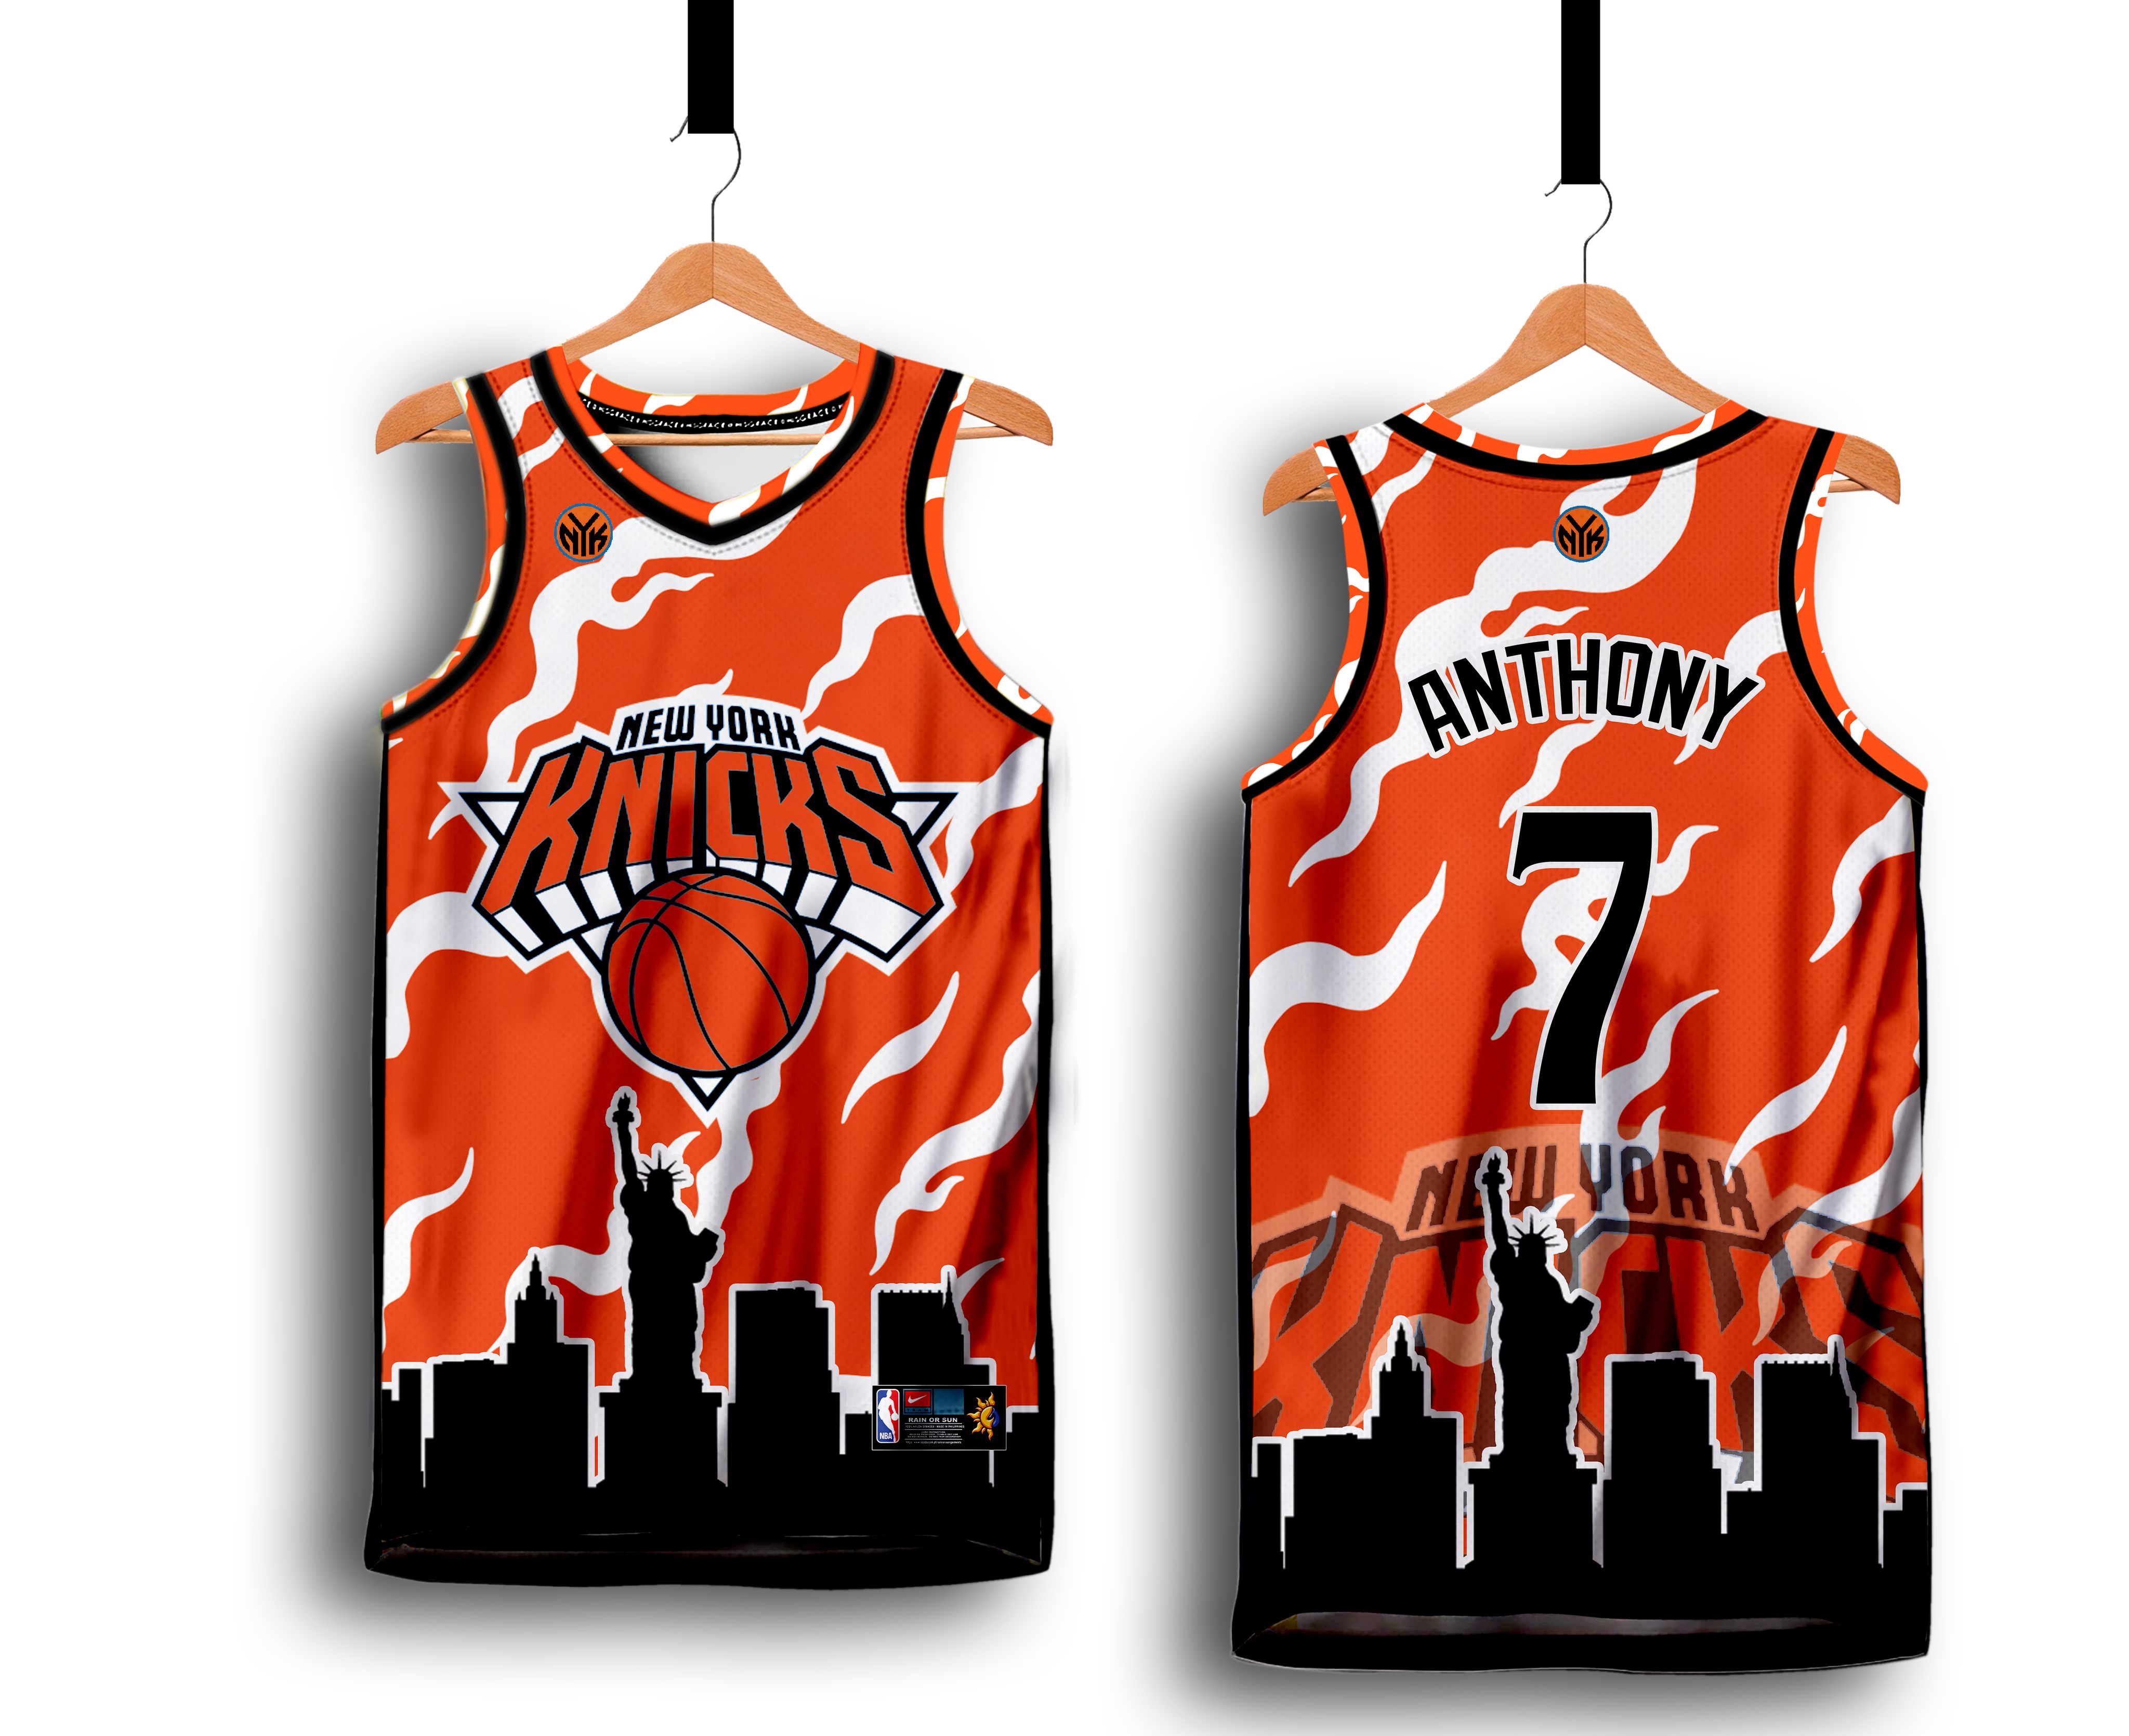 New york basketball jersey high quality sublimation sando for mens